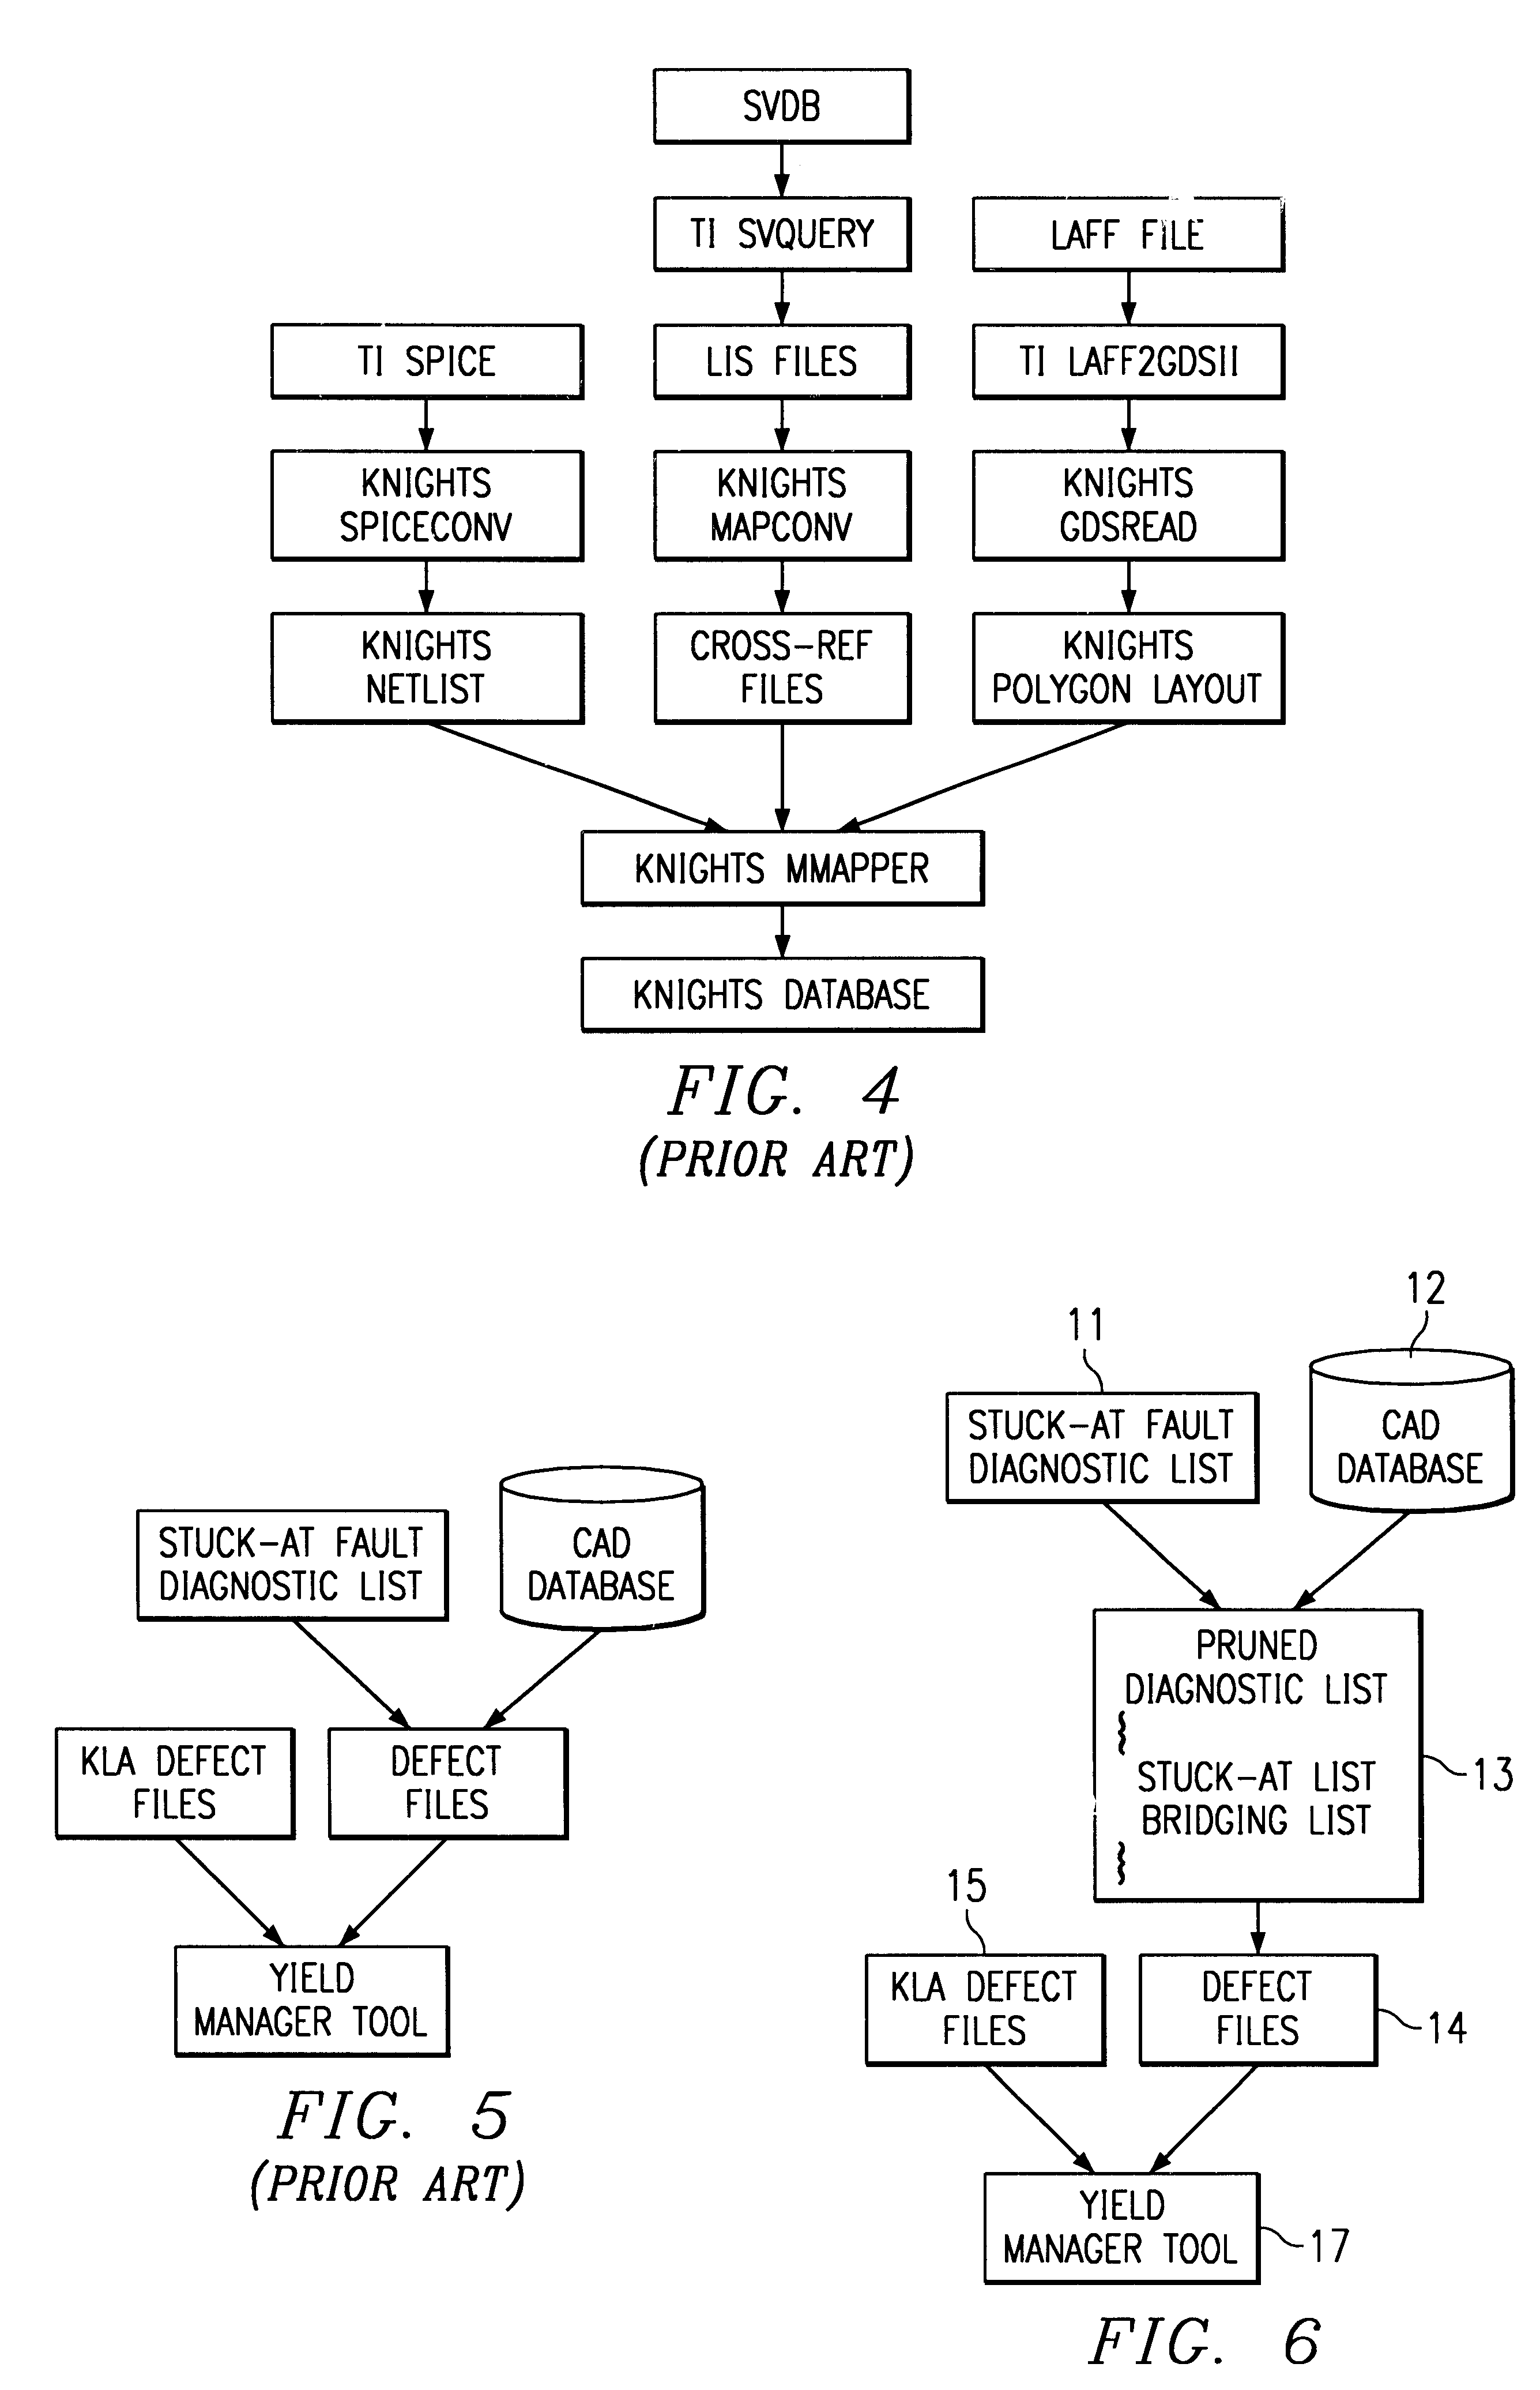 System for mapping logical functional test data of logical integrated circuits to physical representation using pruned diagnostic list